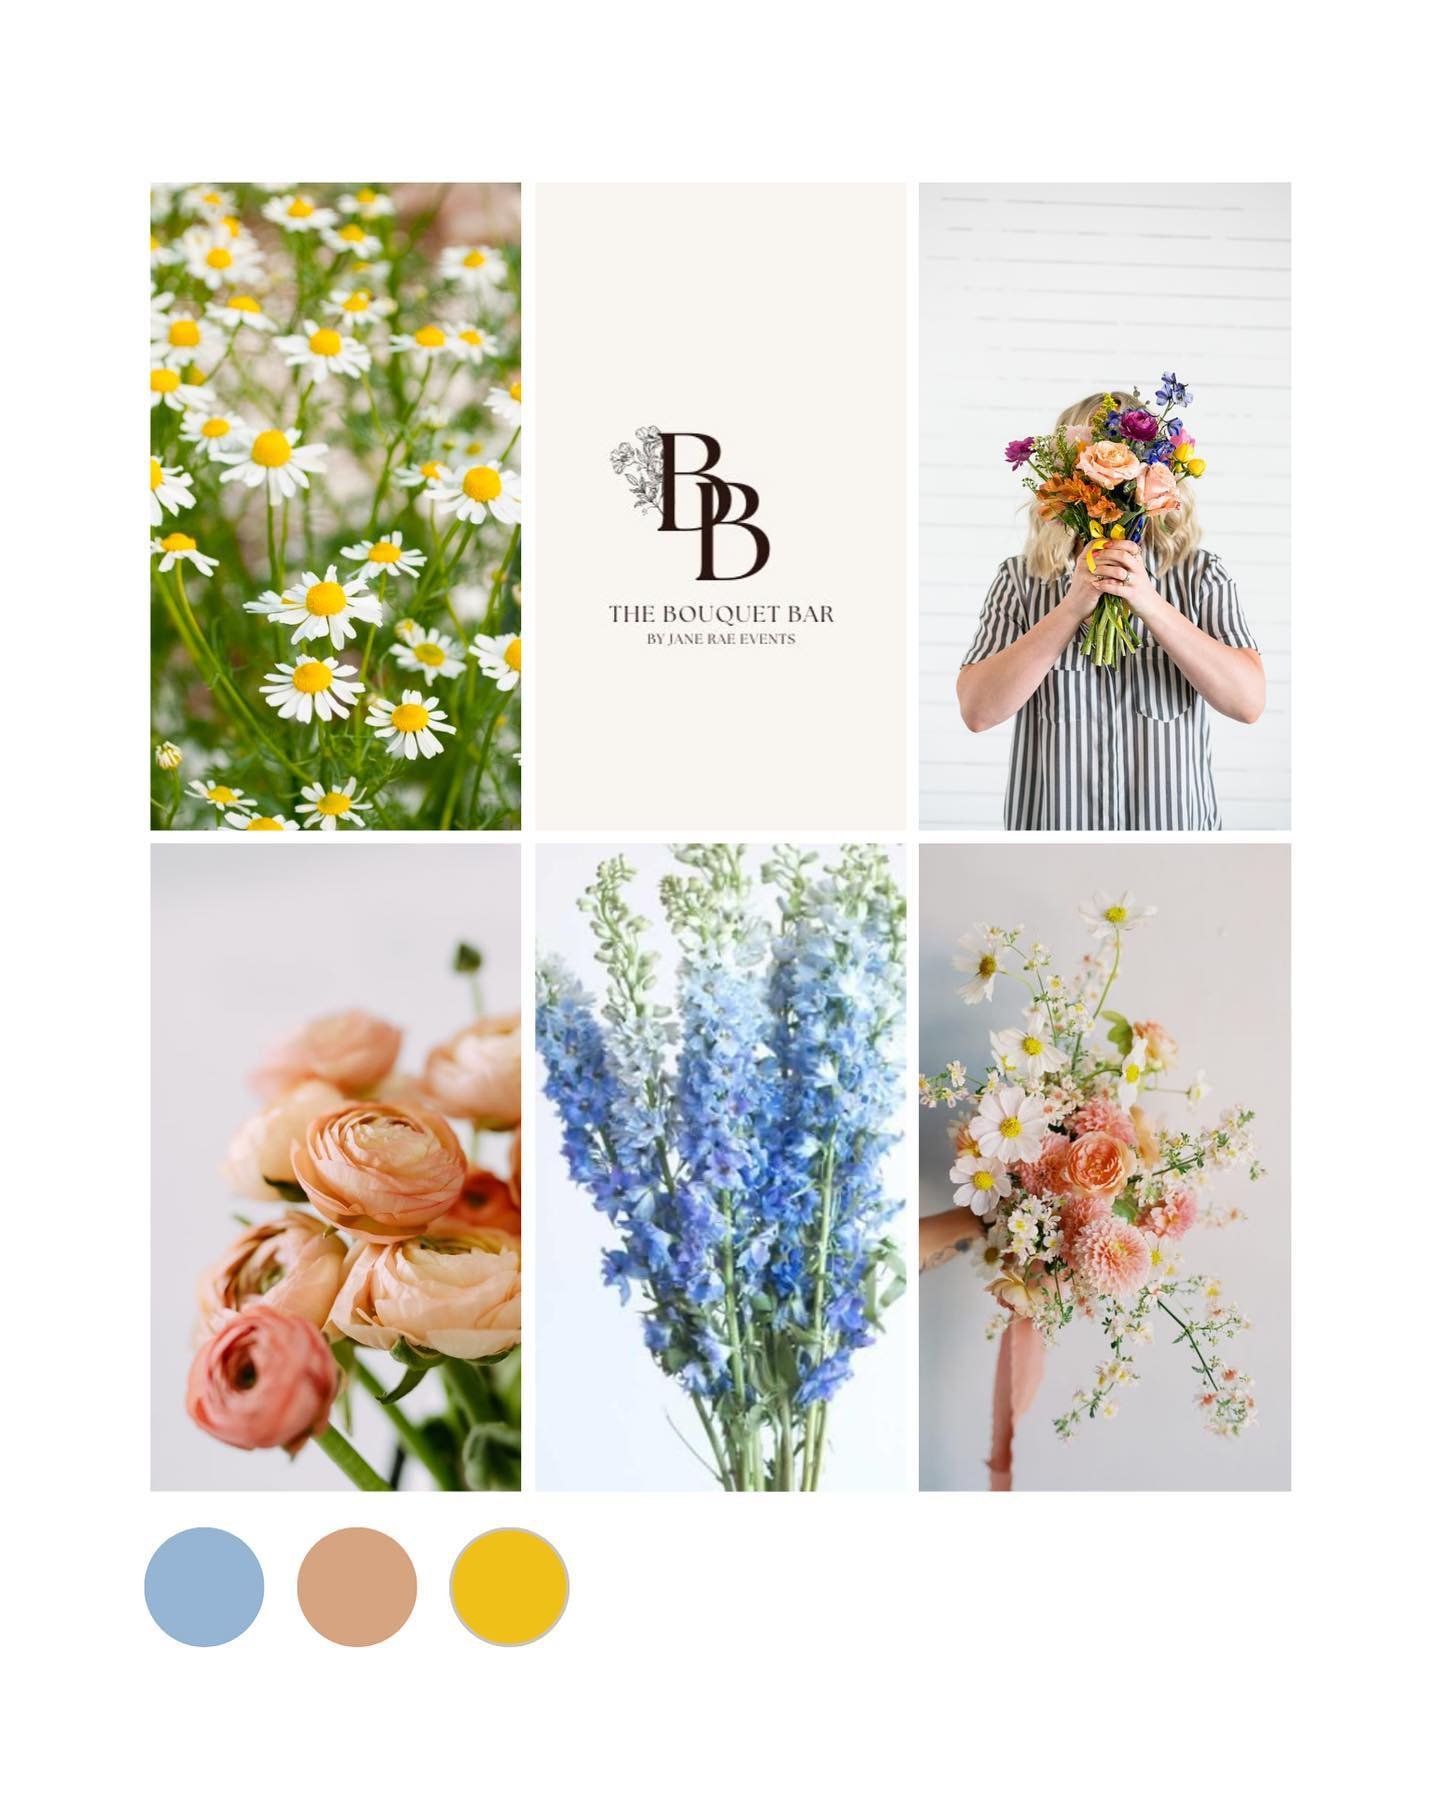 Our subscription color palette inspiration for the month of May 🌷

https://thebouquetbarbyjre.com/all-subscriptions